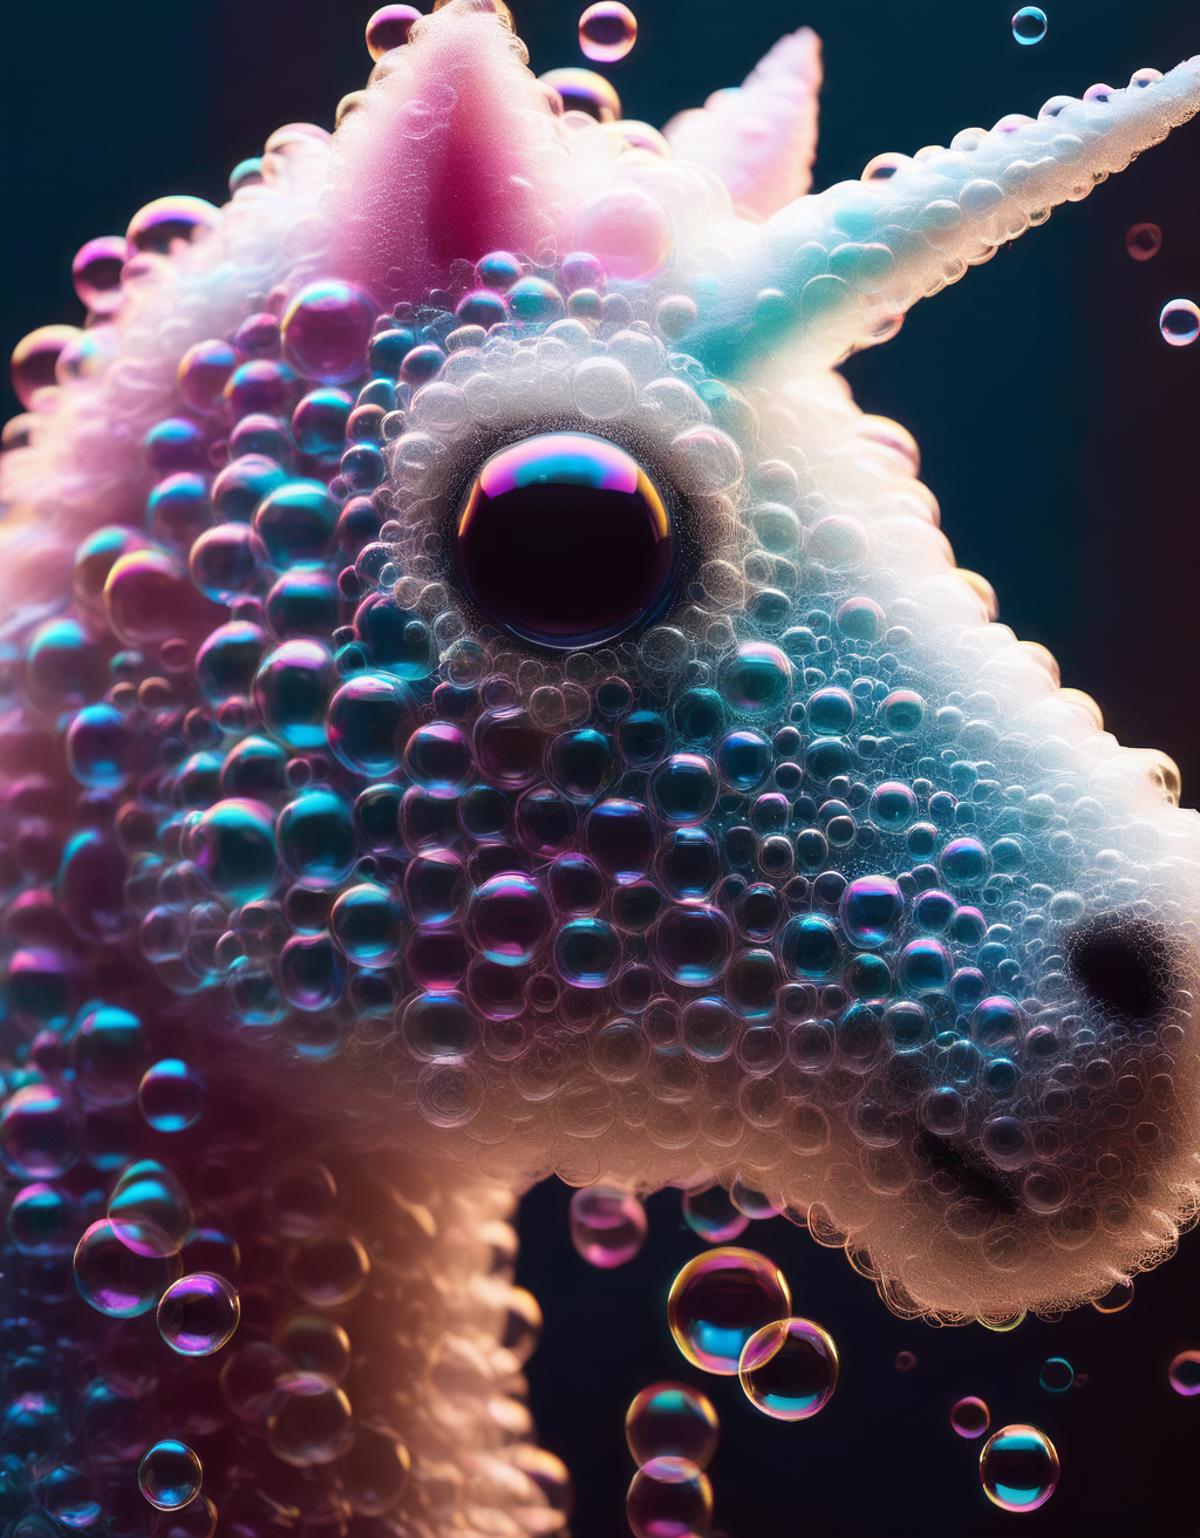 Bubble-covered unicorn head with big, black eyes.